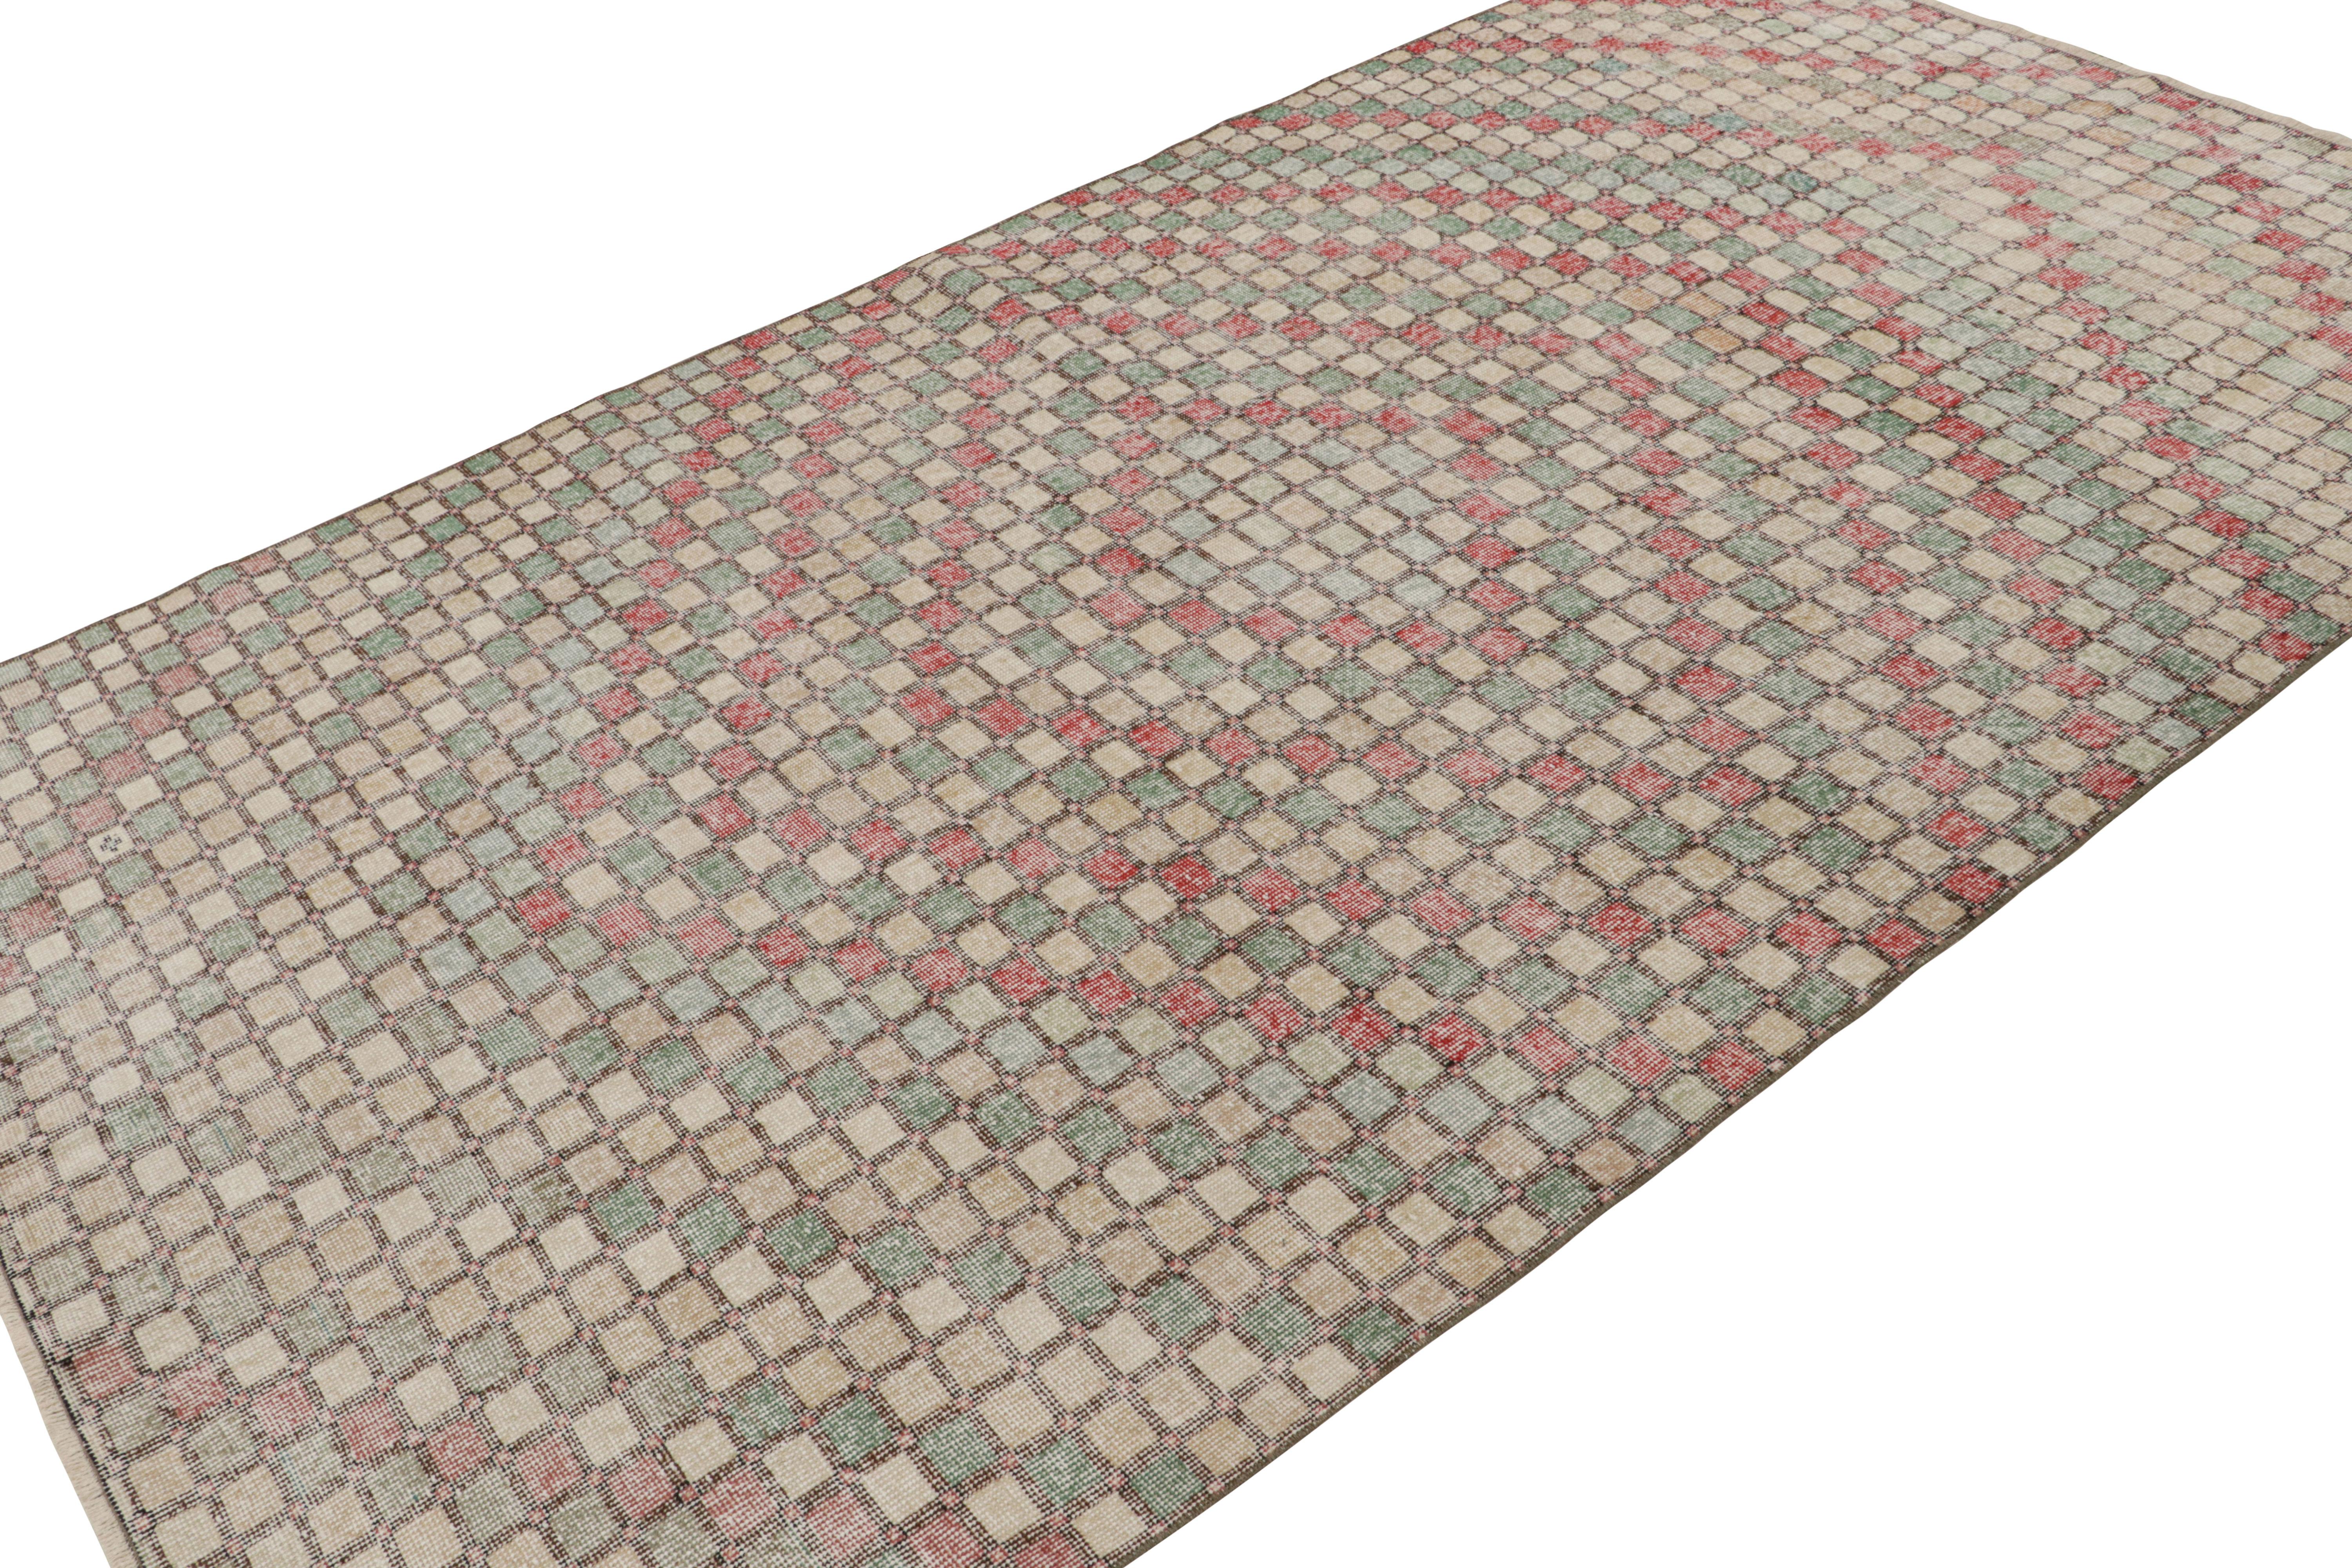 Handknotted in wool, this 6x10 vintage rug originates from Turkey, circa 1960-1970 and is believed to hail from the Turkish artist Zeki Muren. 

On the Design:

Keen eyes will note a polychromatic colorway of pastel tones underscoring a geometric